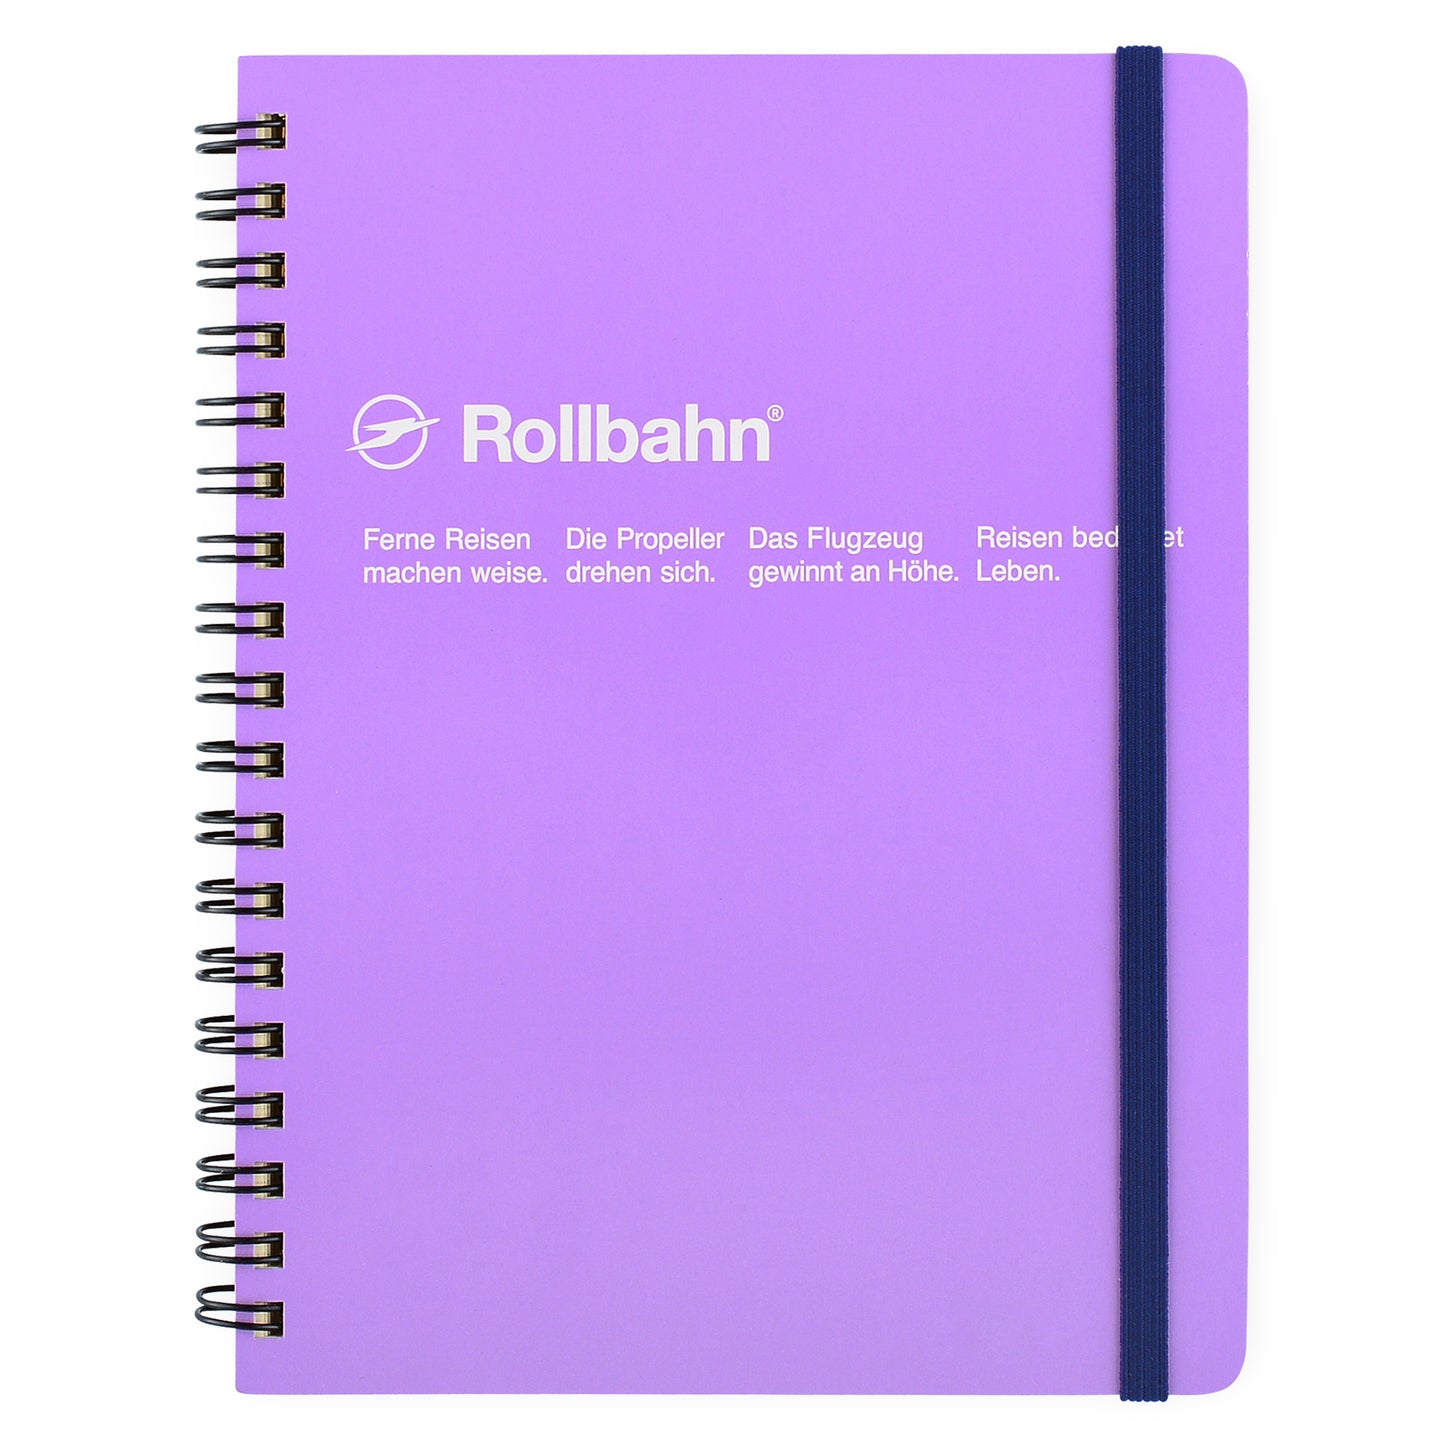 Delfonics Rollbahn Notebook Small, Large Or A5 | 9 Colors Light Purple / Small (4.5 x 5.5")